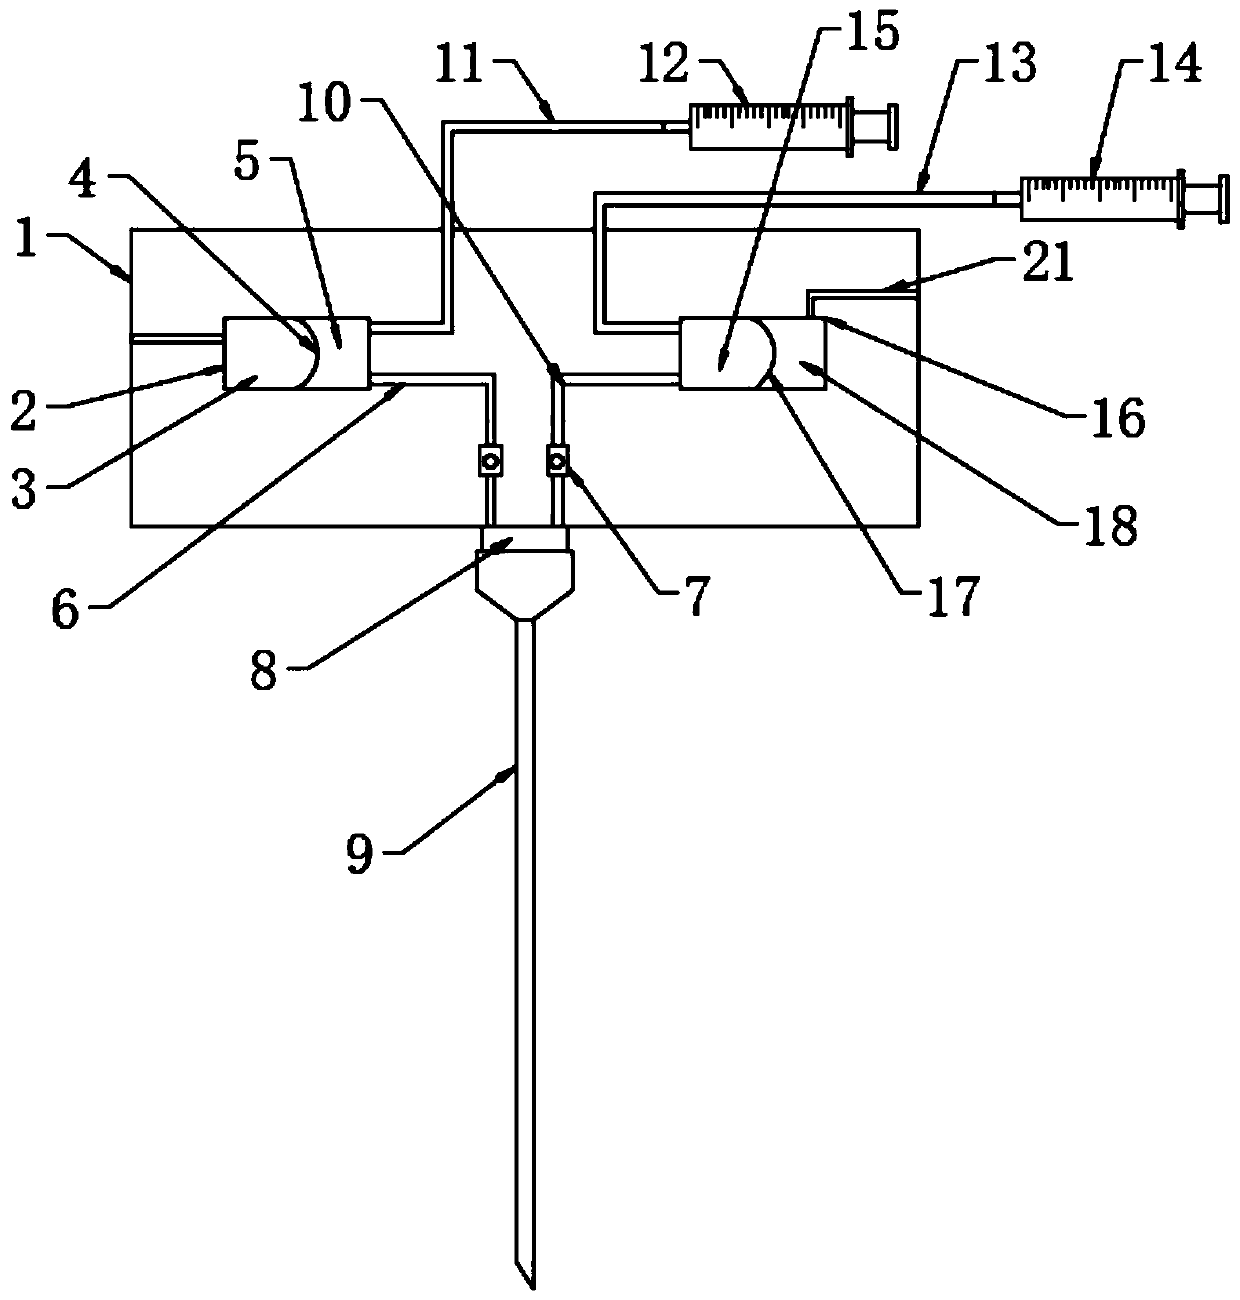 Device used for nerve blocking drug injection and convenient to operate by single person